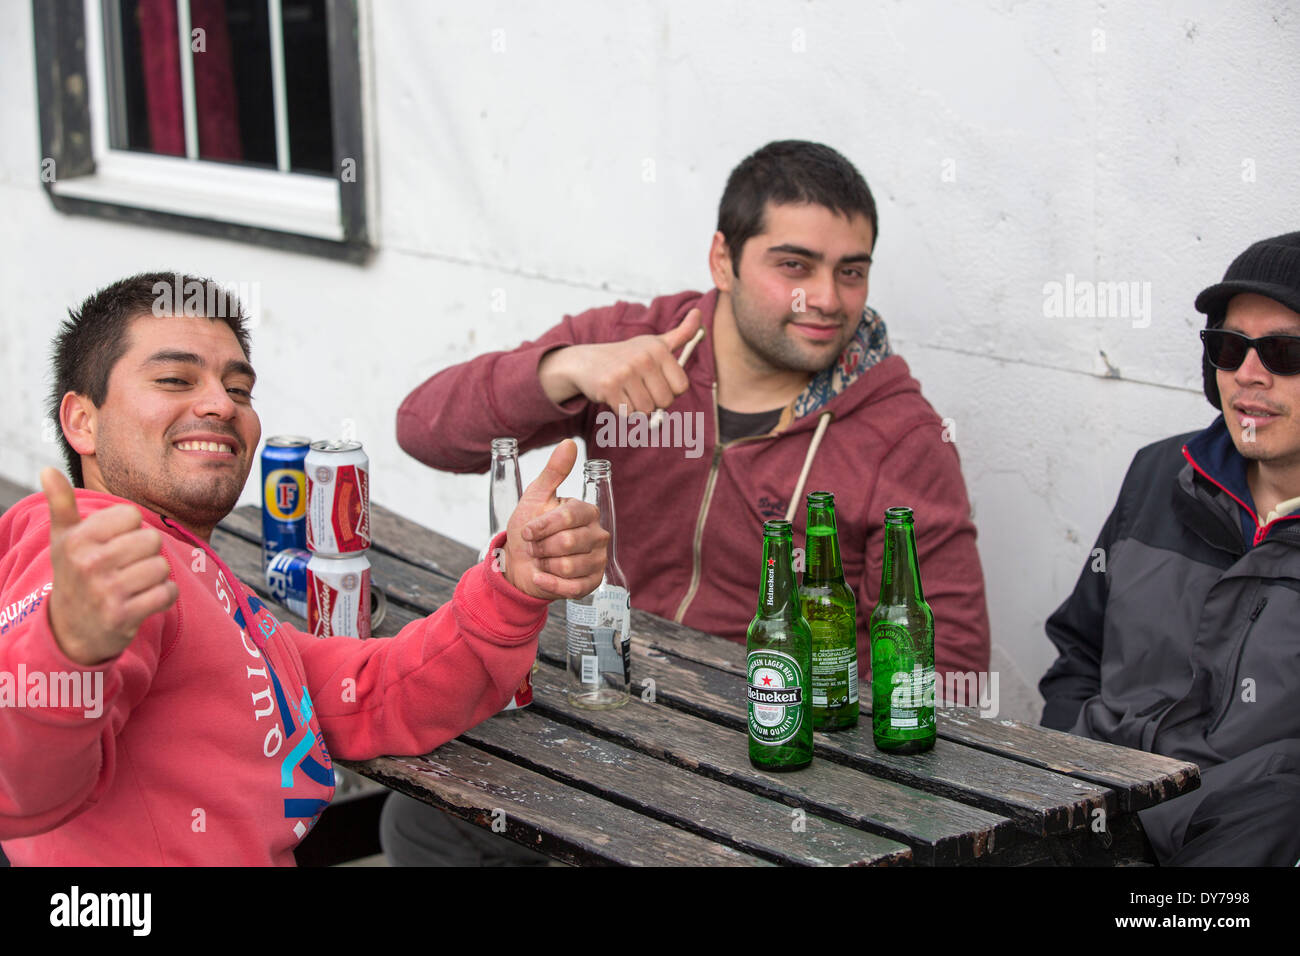 Young men drinking outside a pub in Port Stanley in the Falkland Islands. Stock Photo